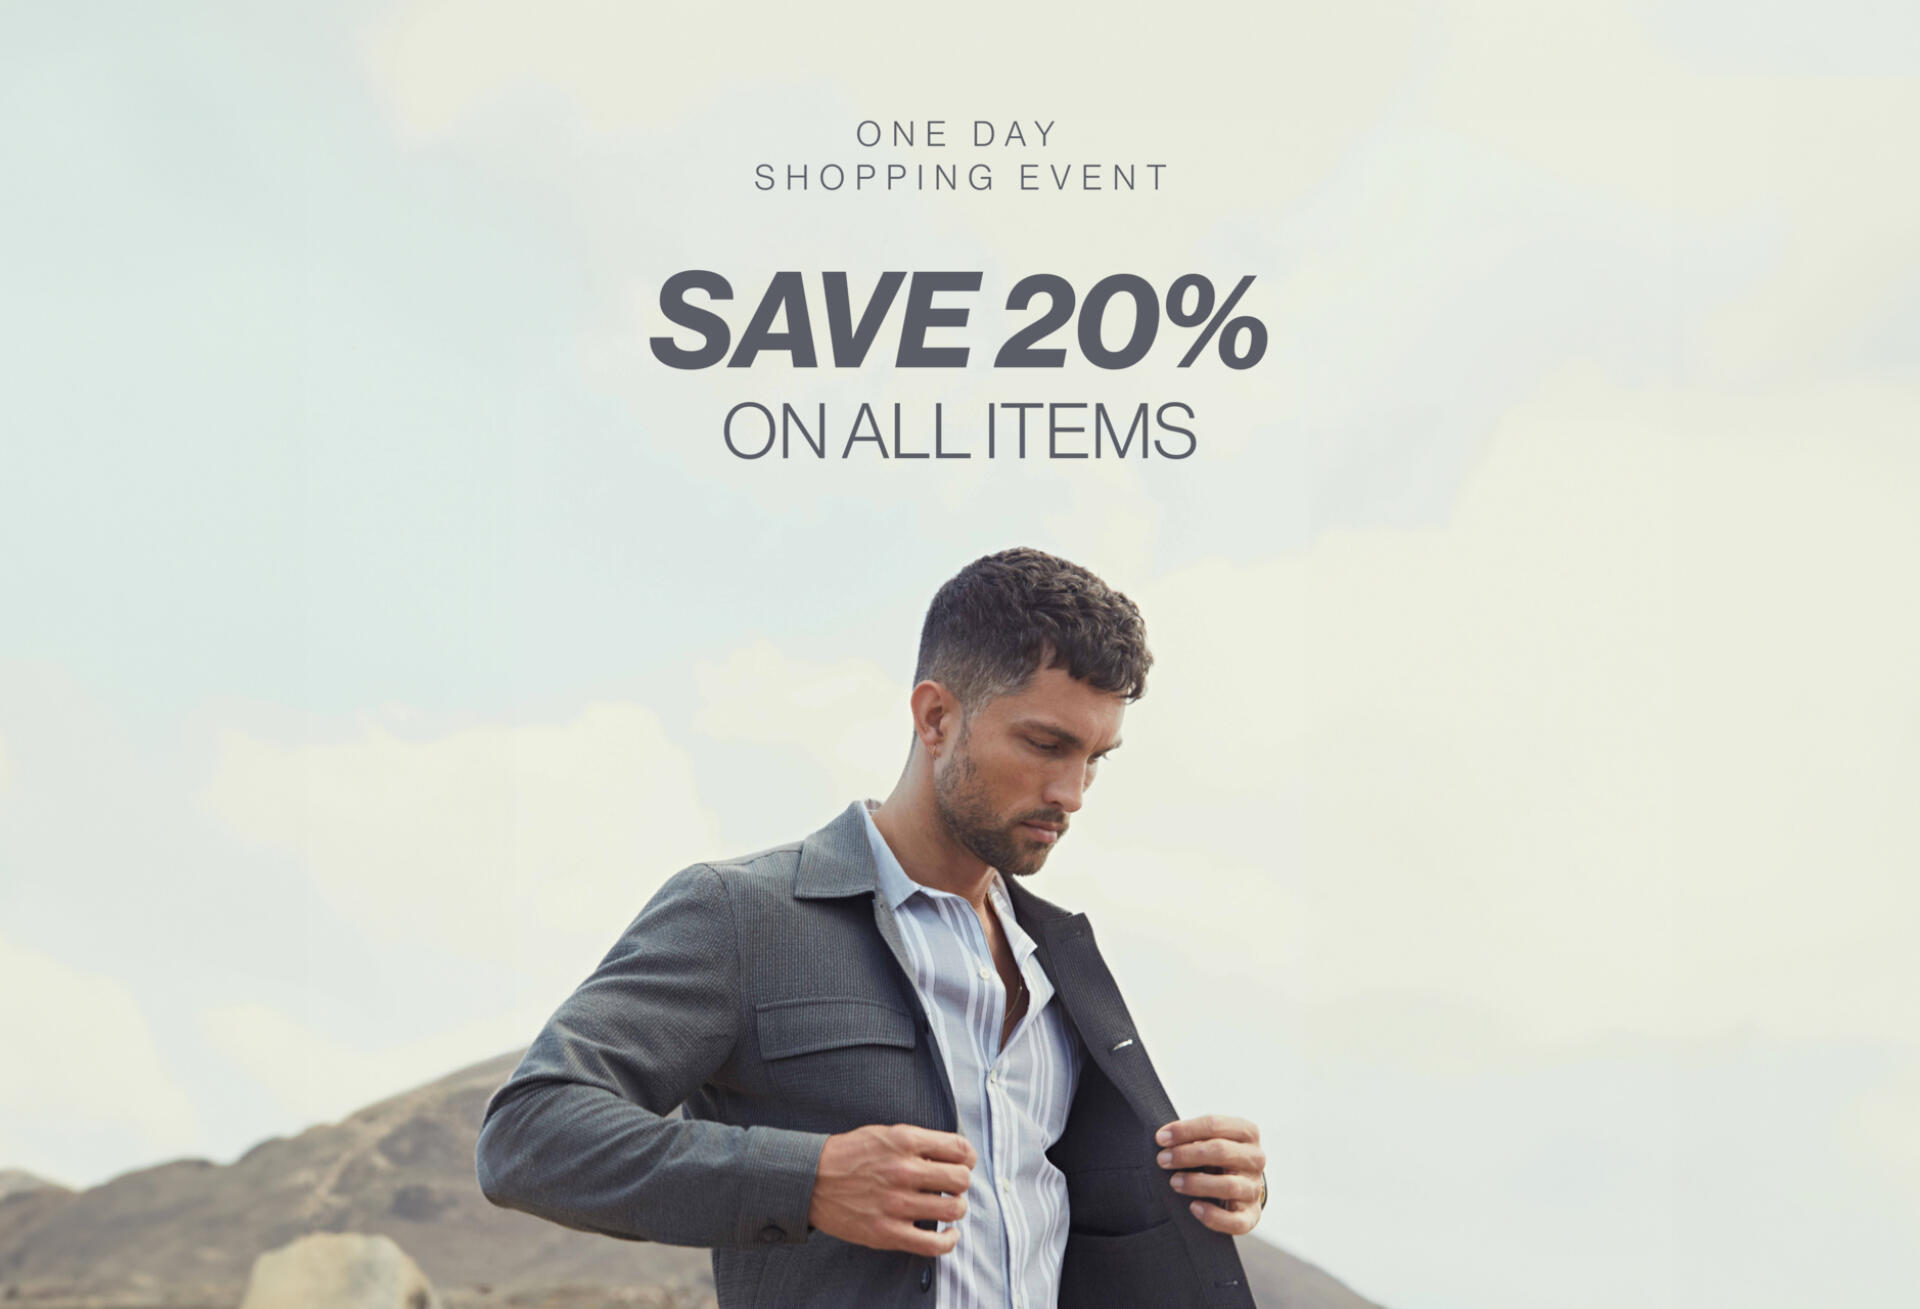 Save 20% on all items